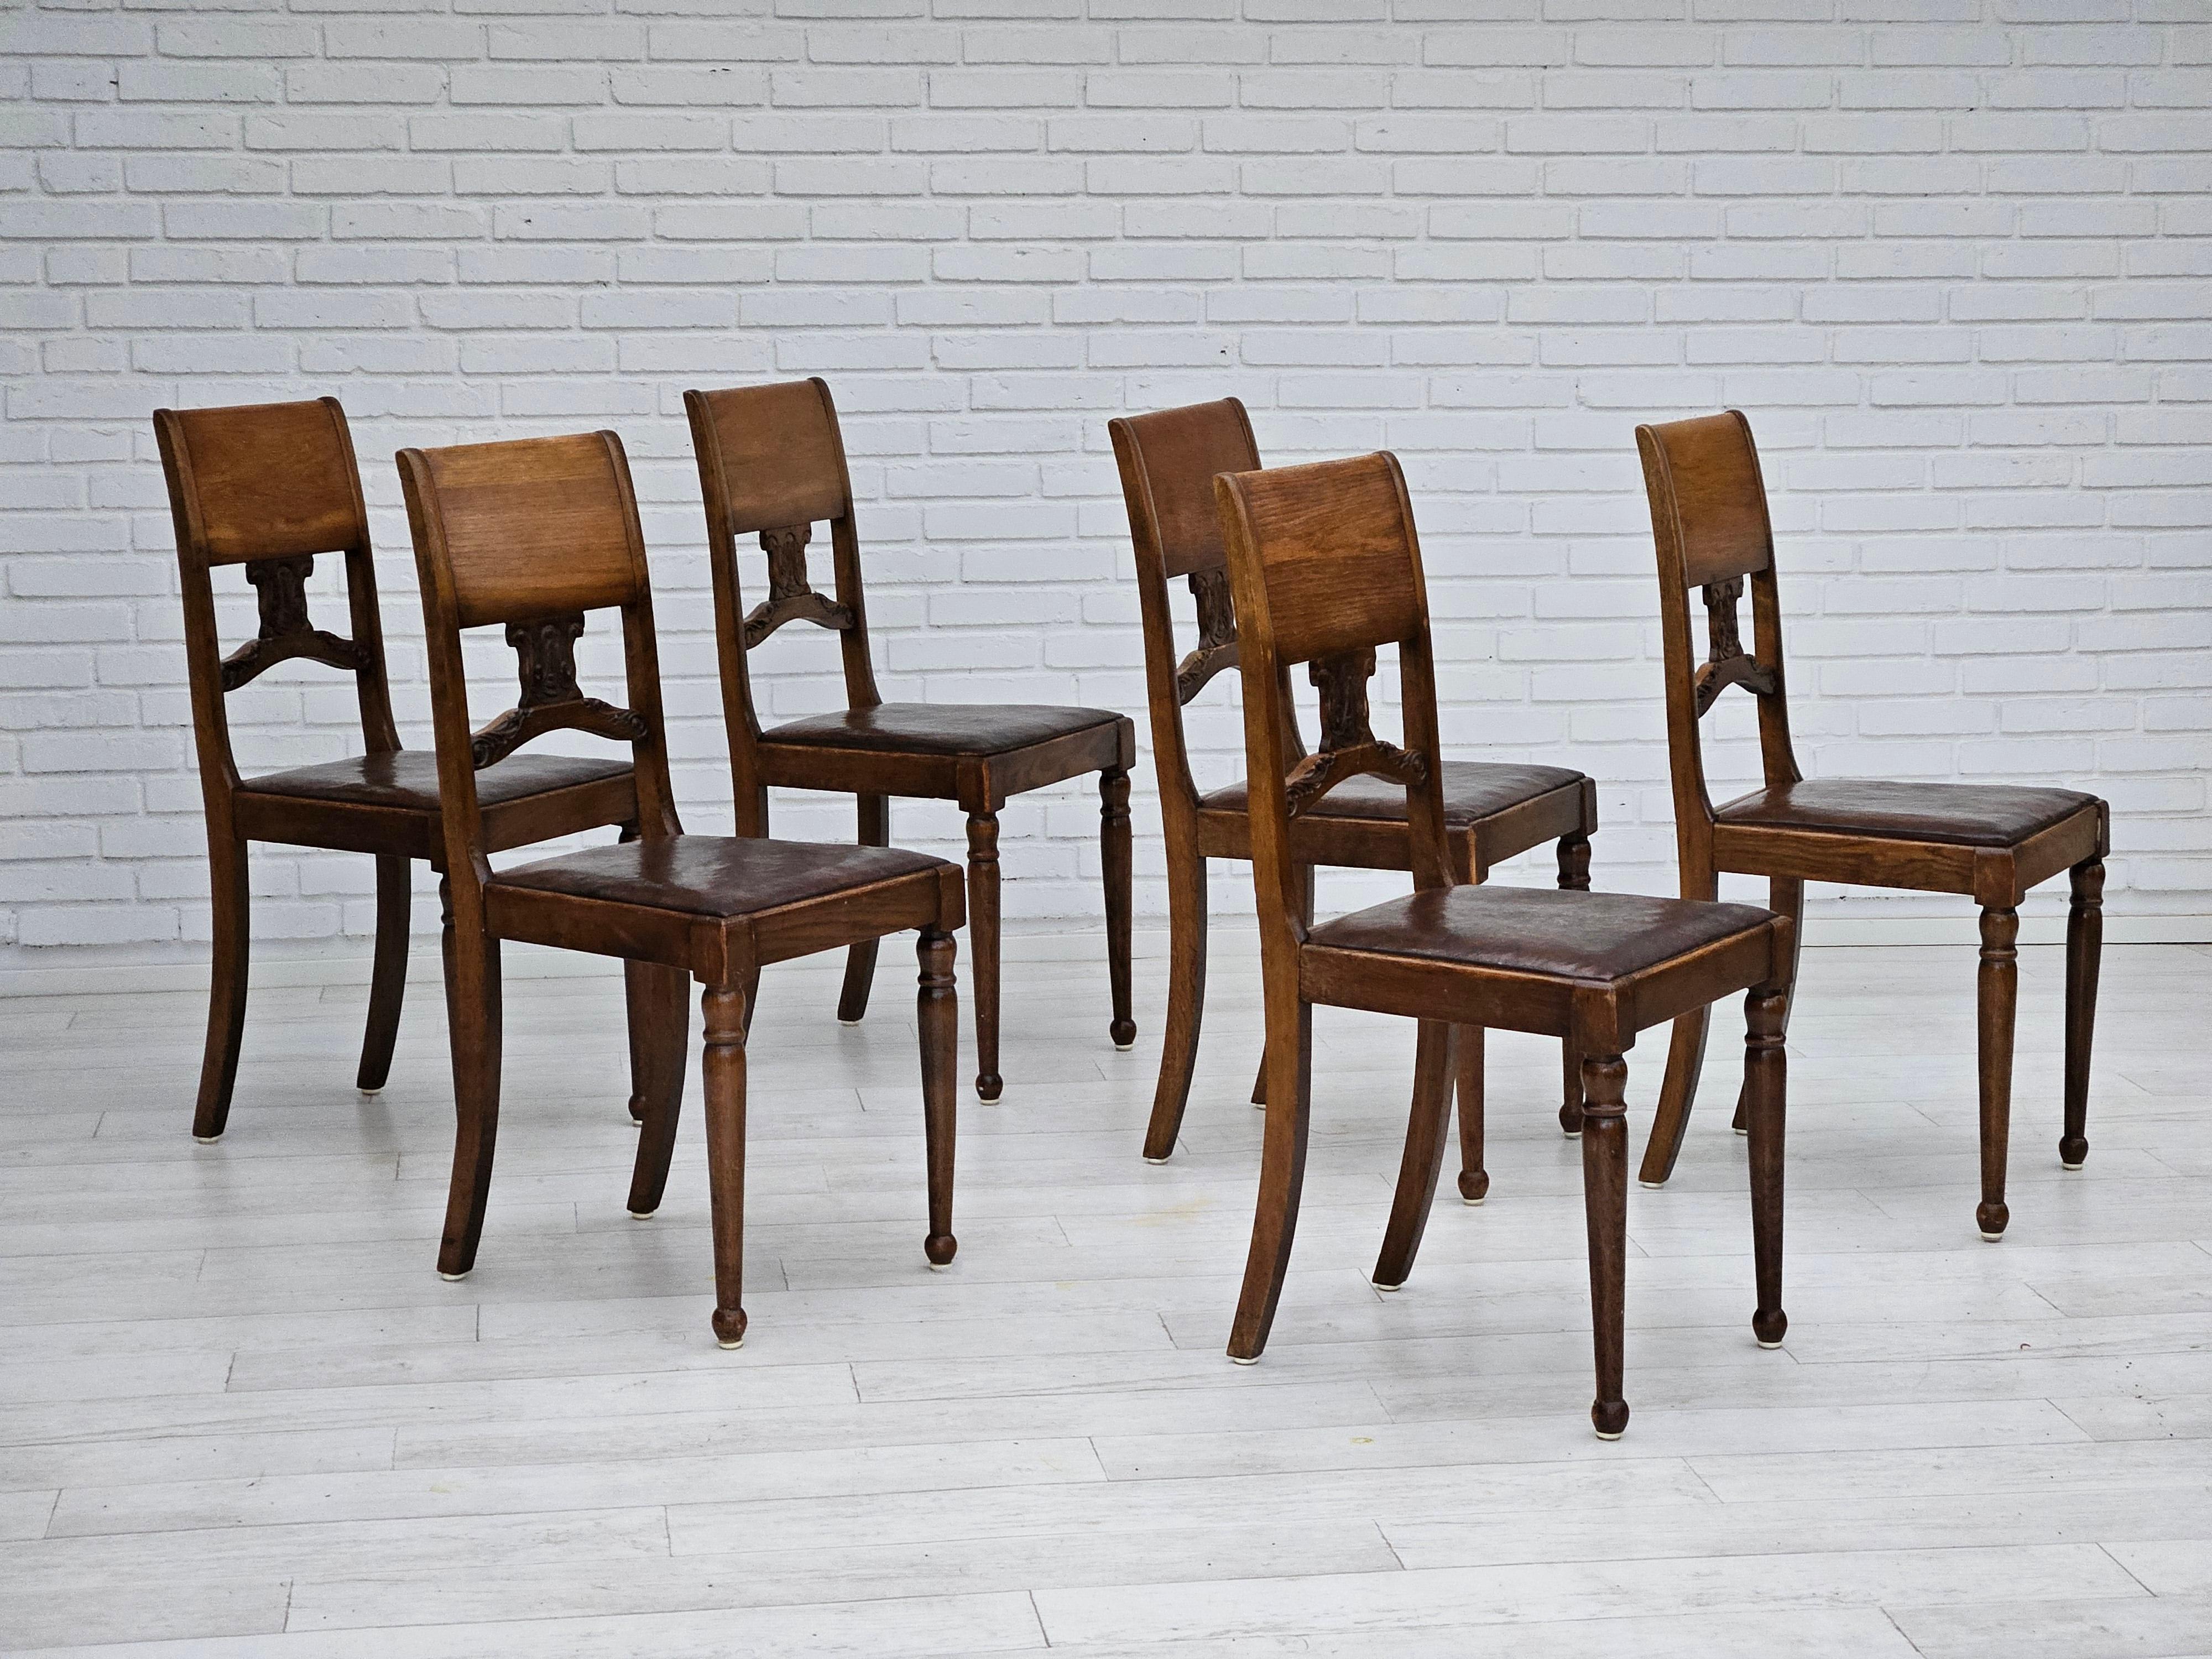 1930s, set of 6 chairs in original good condition: no smells and no stains. Leather and oak wood. Original cool leather and wood patina. Manufactured by scandinavian furniture maker in about 1930.